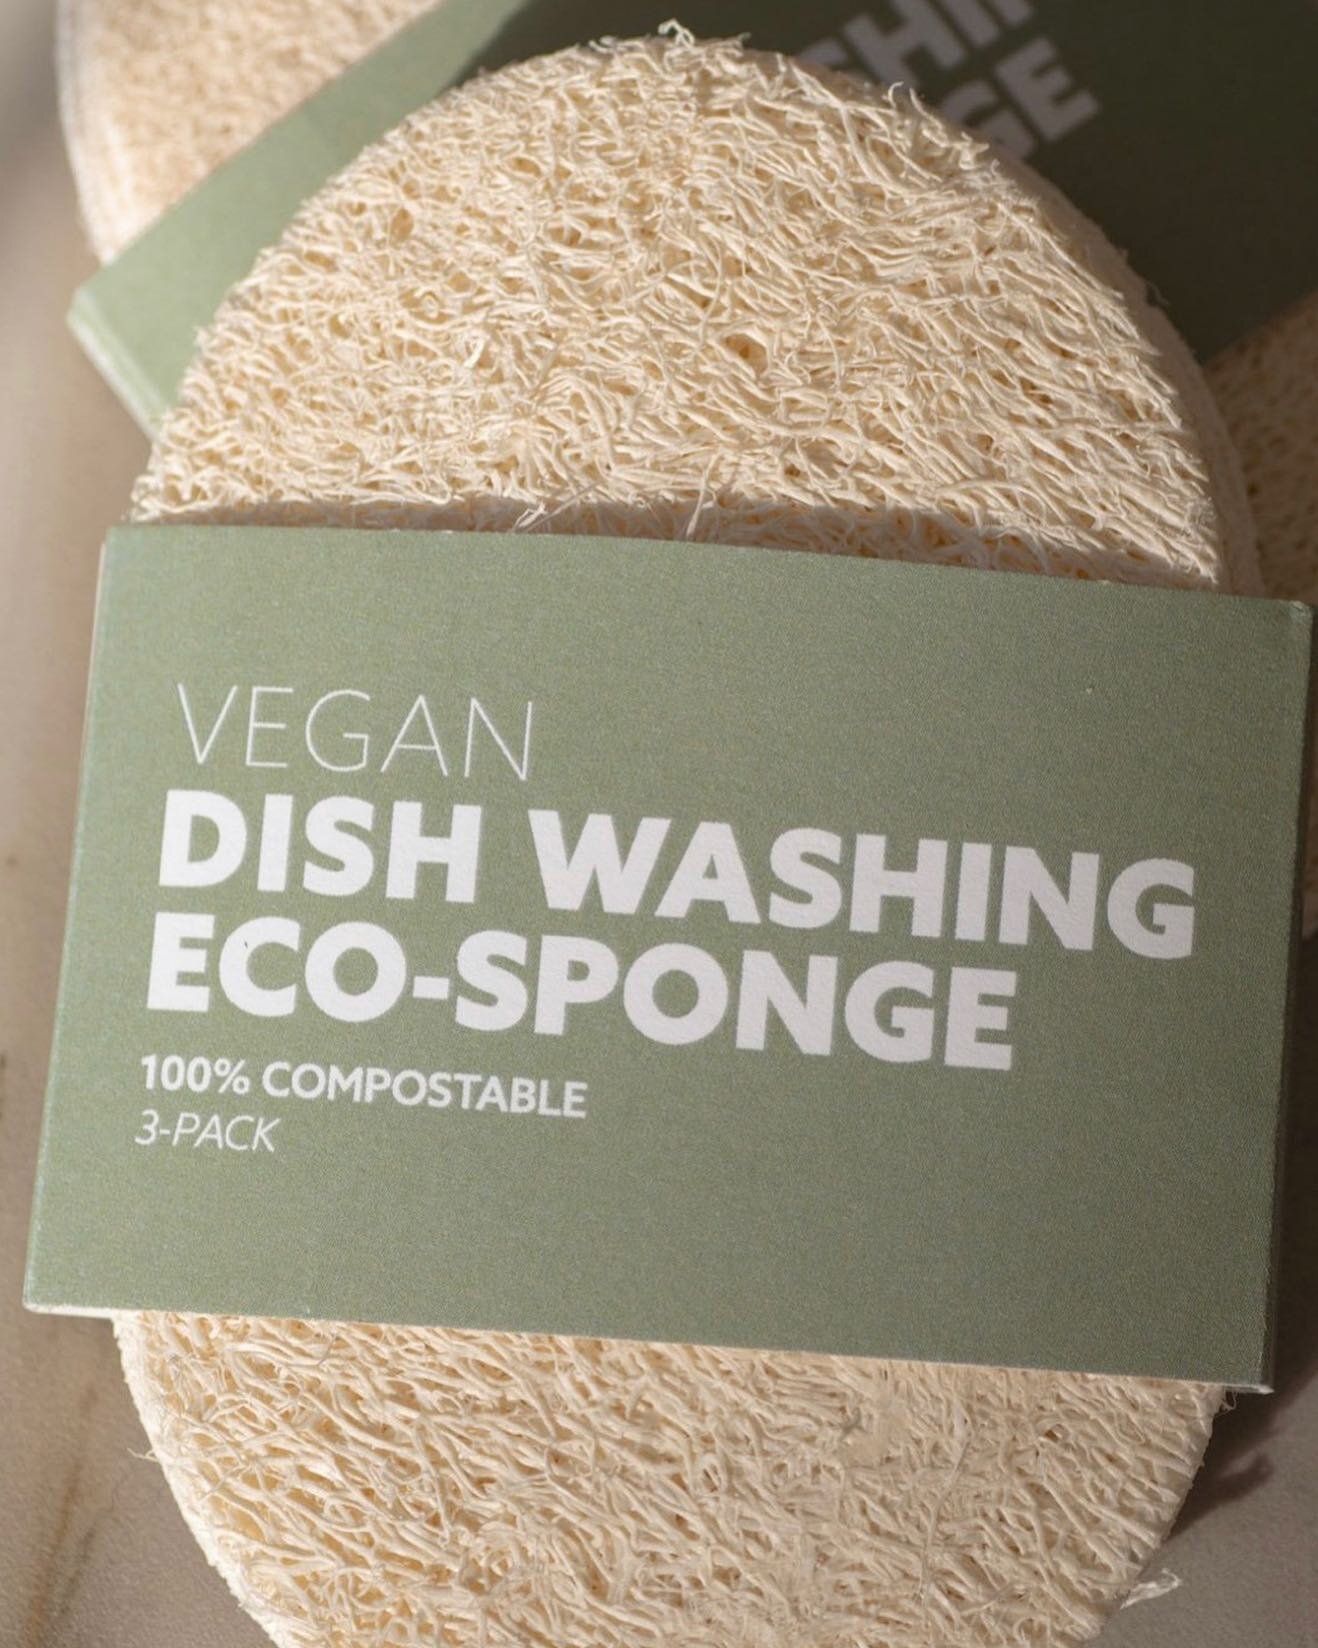 One of the many eco friendly products we are bringing your way saskatoon! Yes, your dish washing sponge can be compostable. 
Our goal is to bring you sustainable, natural products to help you, for whatever stage of your zero waste journey you&rsquo;r